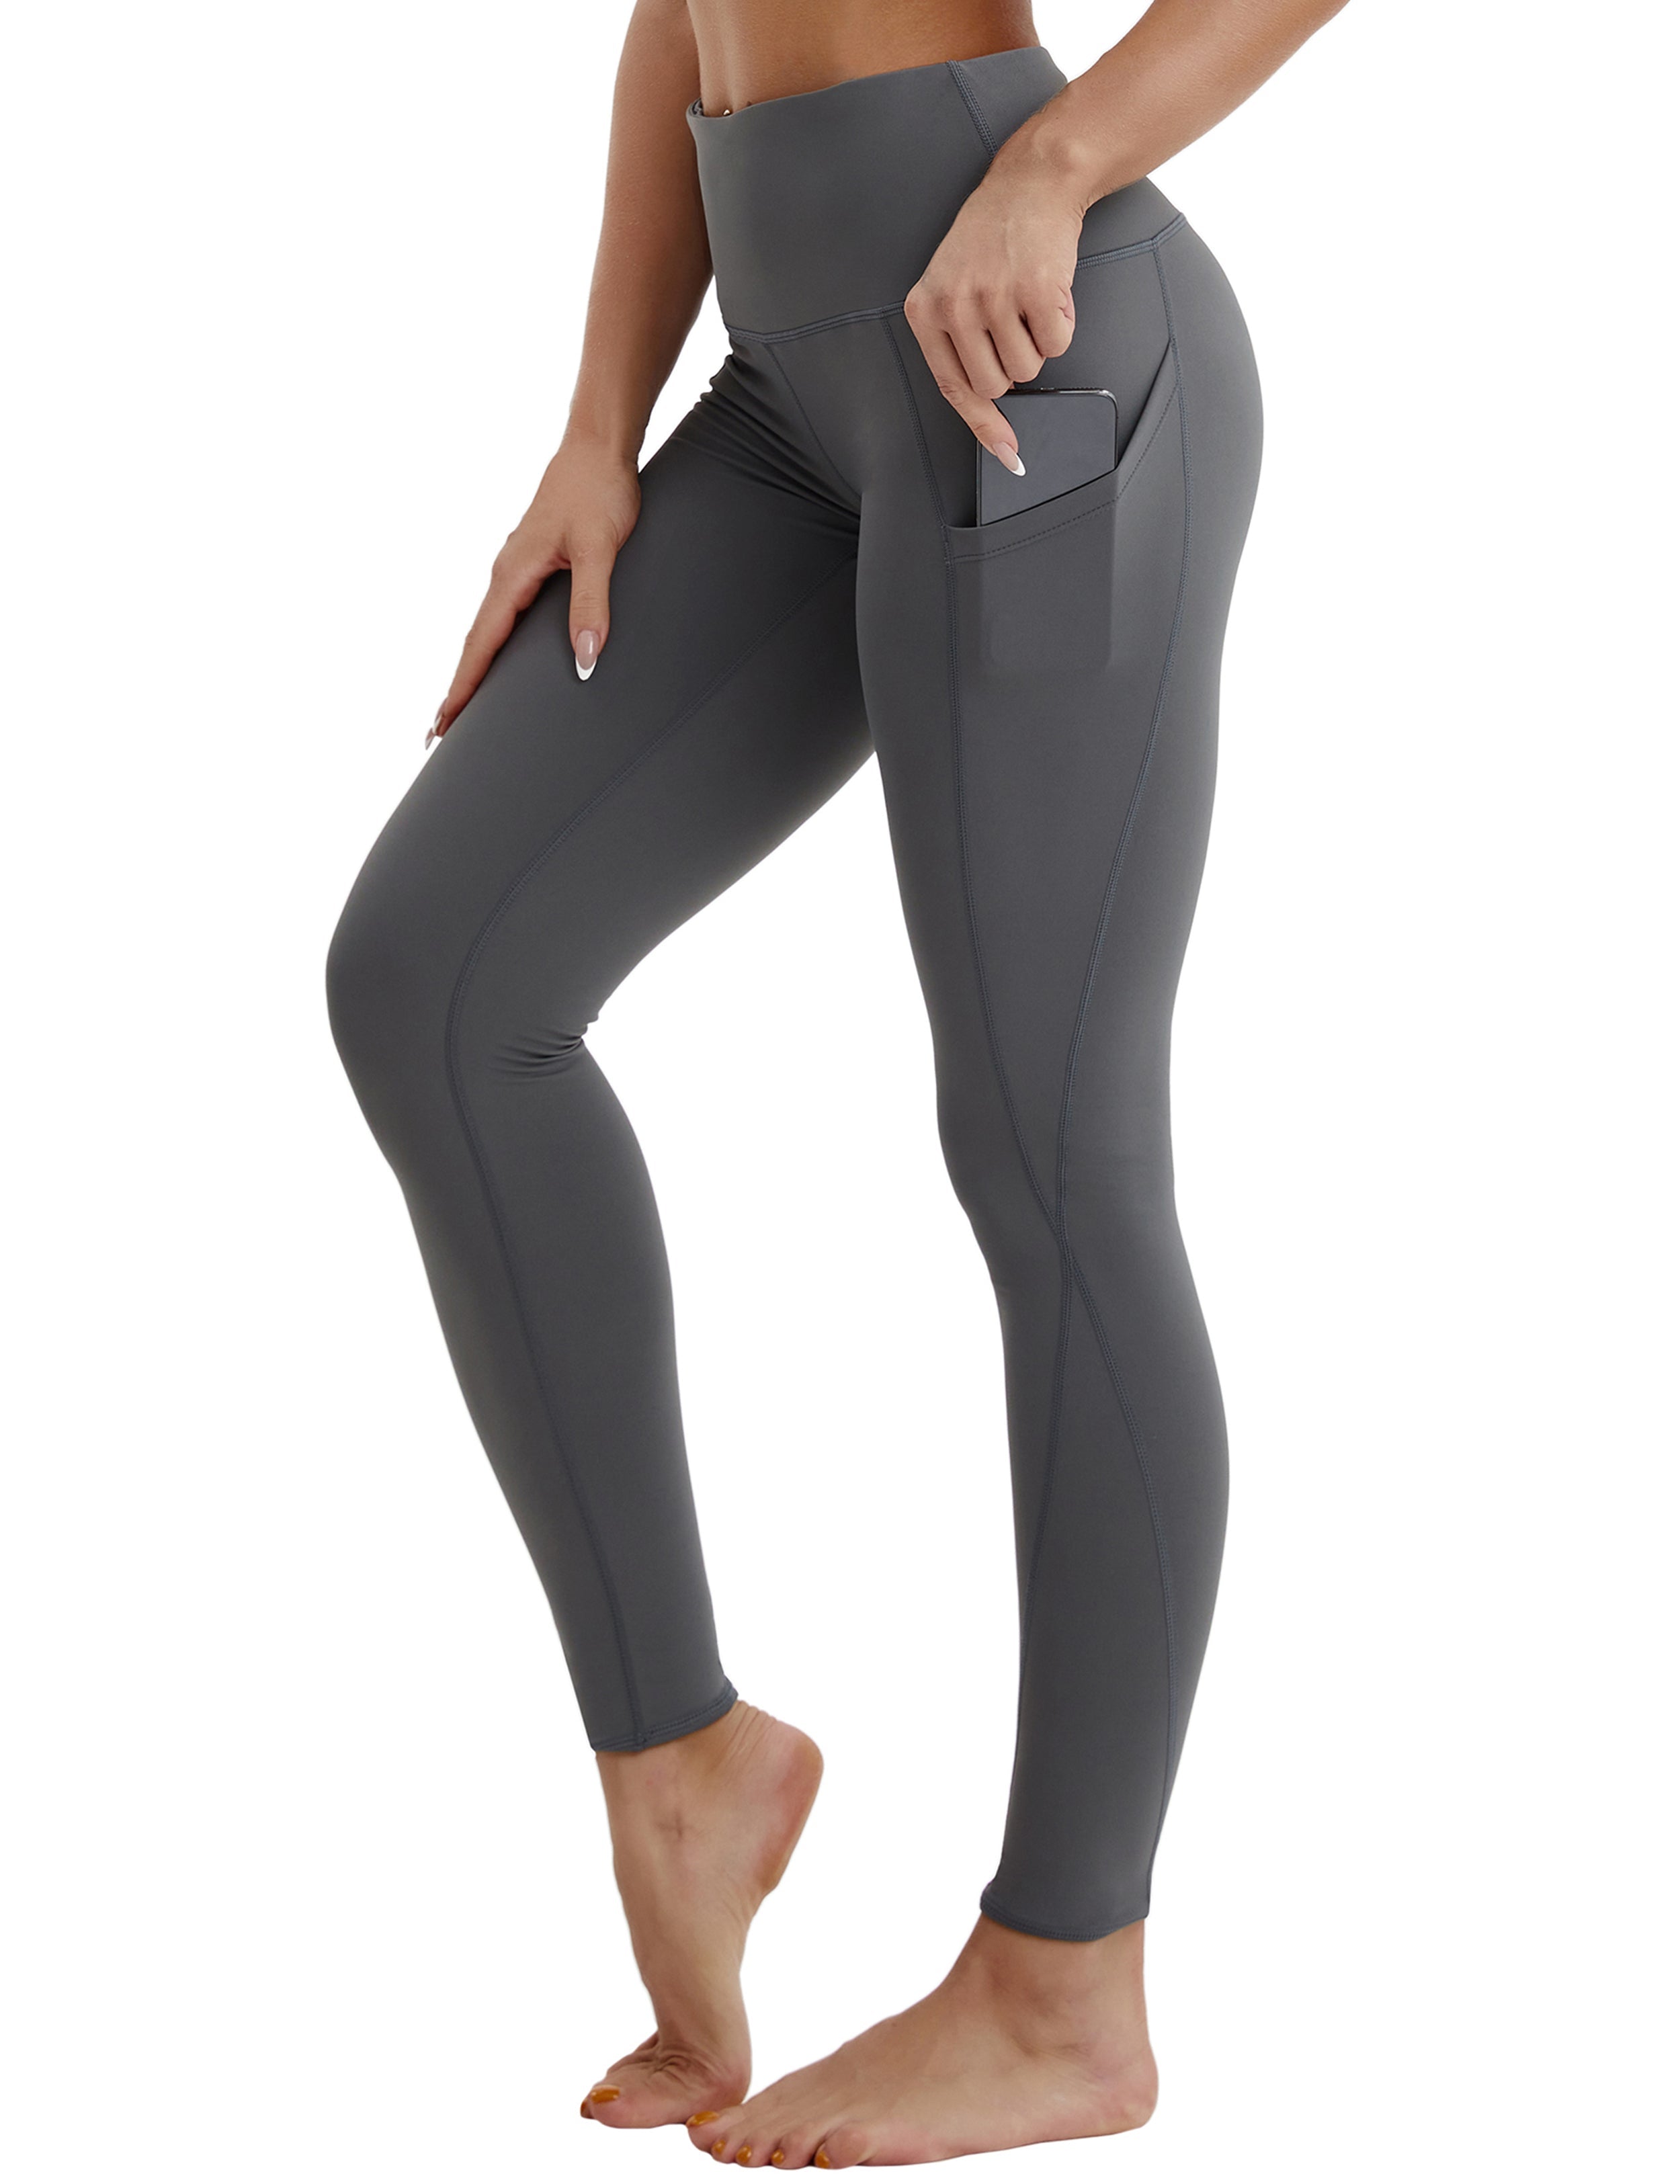 High Waist Side Pockets Plus Size Pants shadowcharcoal 75% Nylon, 25% Spandex Fabric doesn't attract lint easily 4-way stretch No see-through Moisture-wicking Tummy control Inner pocket